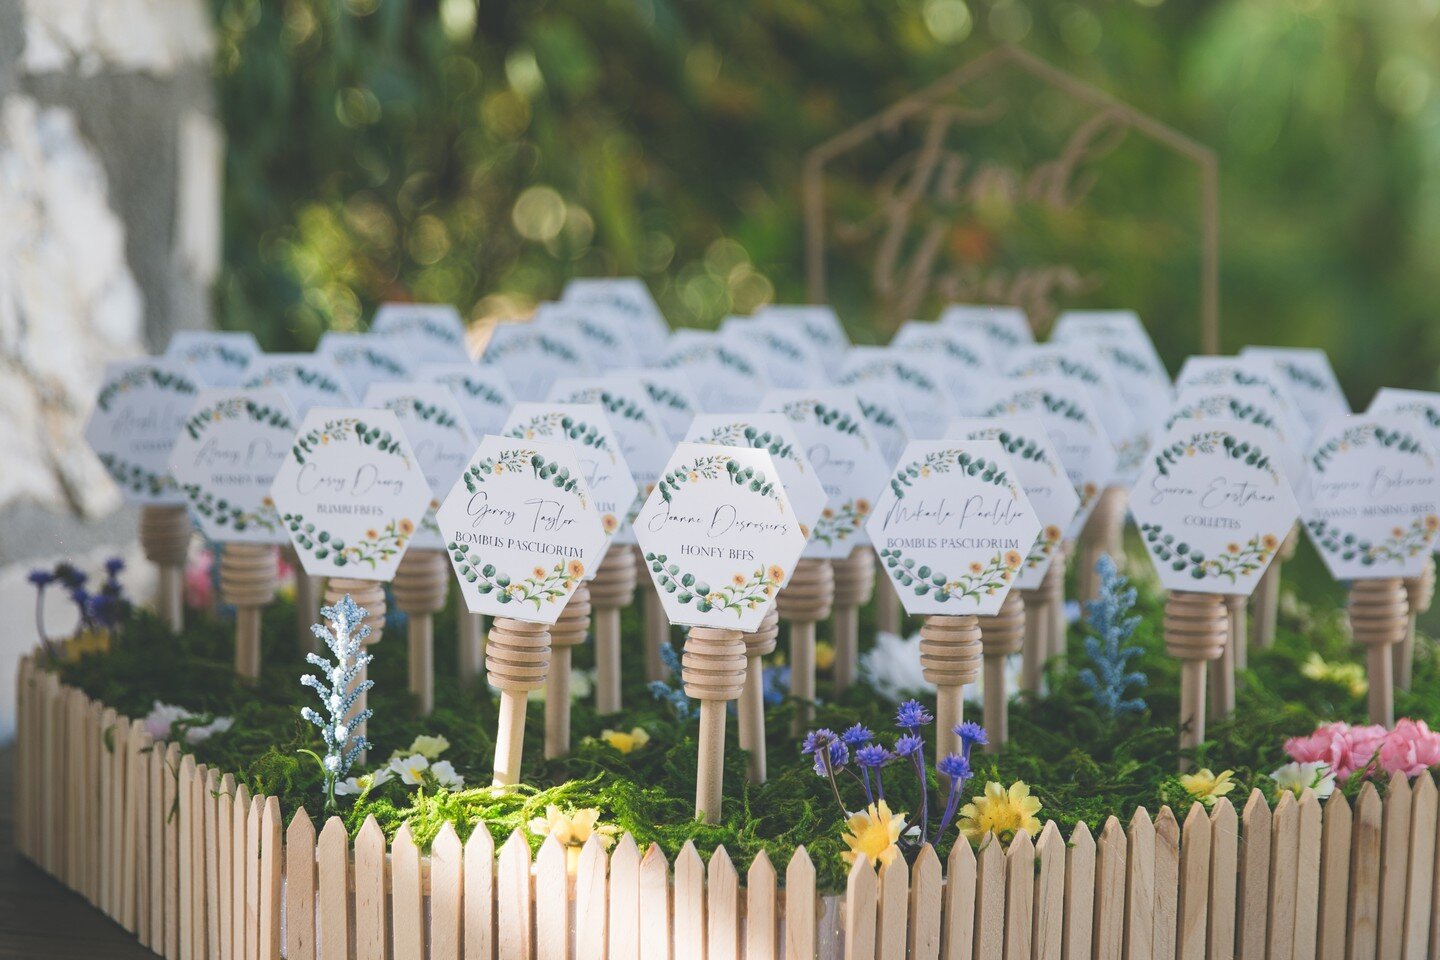 Super cute hand made seating place cards!